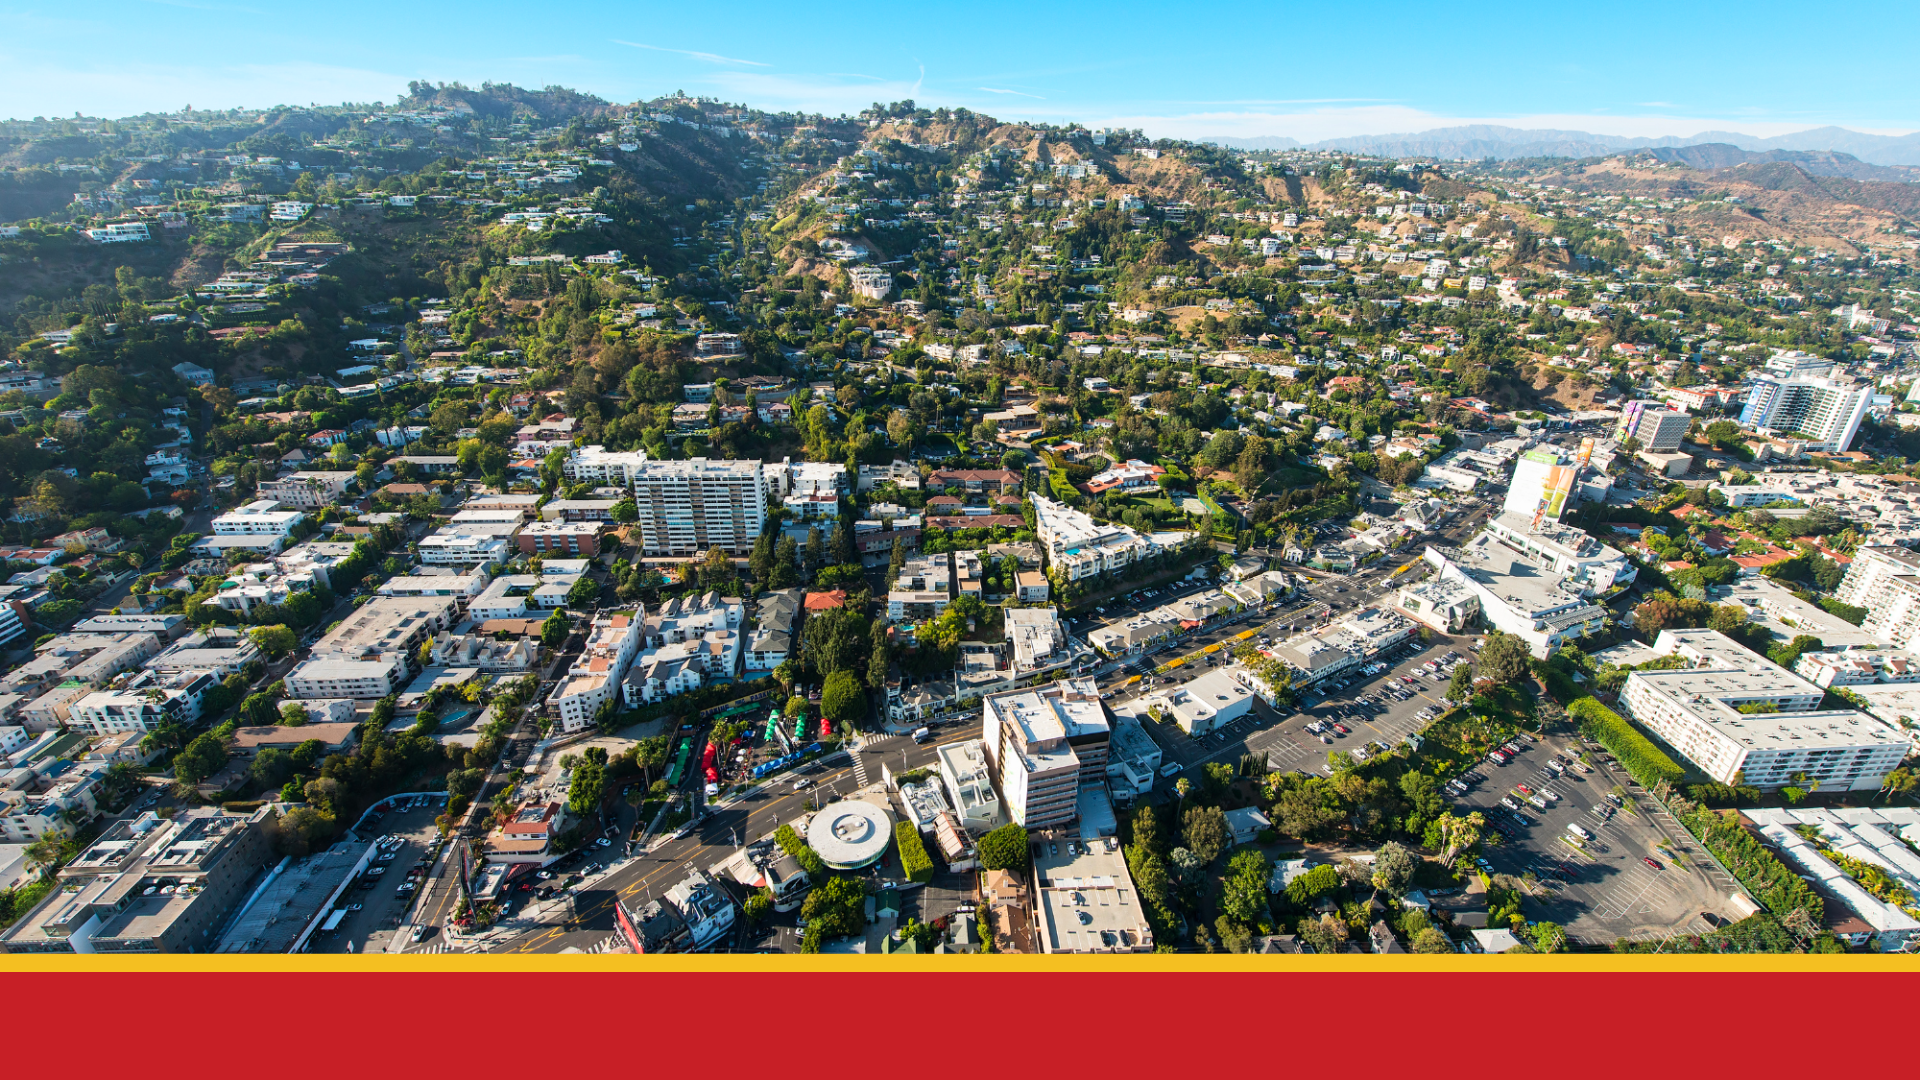 Aerial image of the City of West Hollywoof